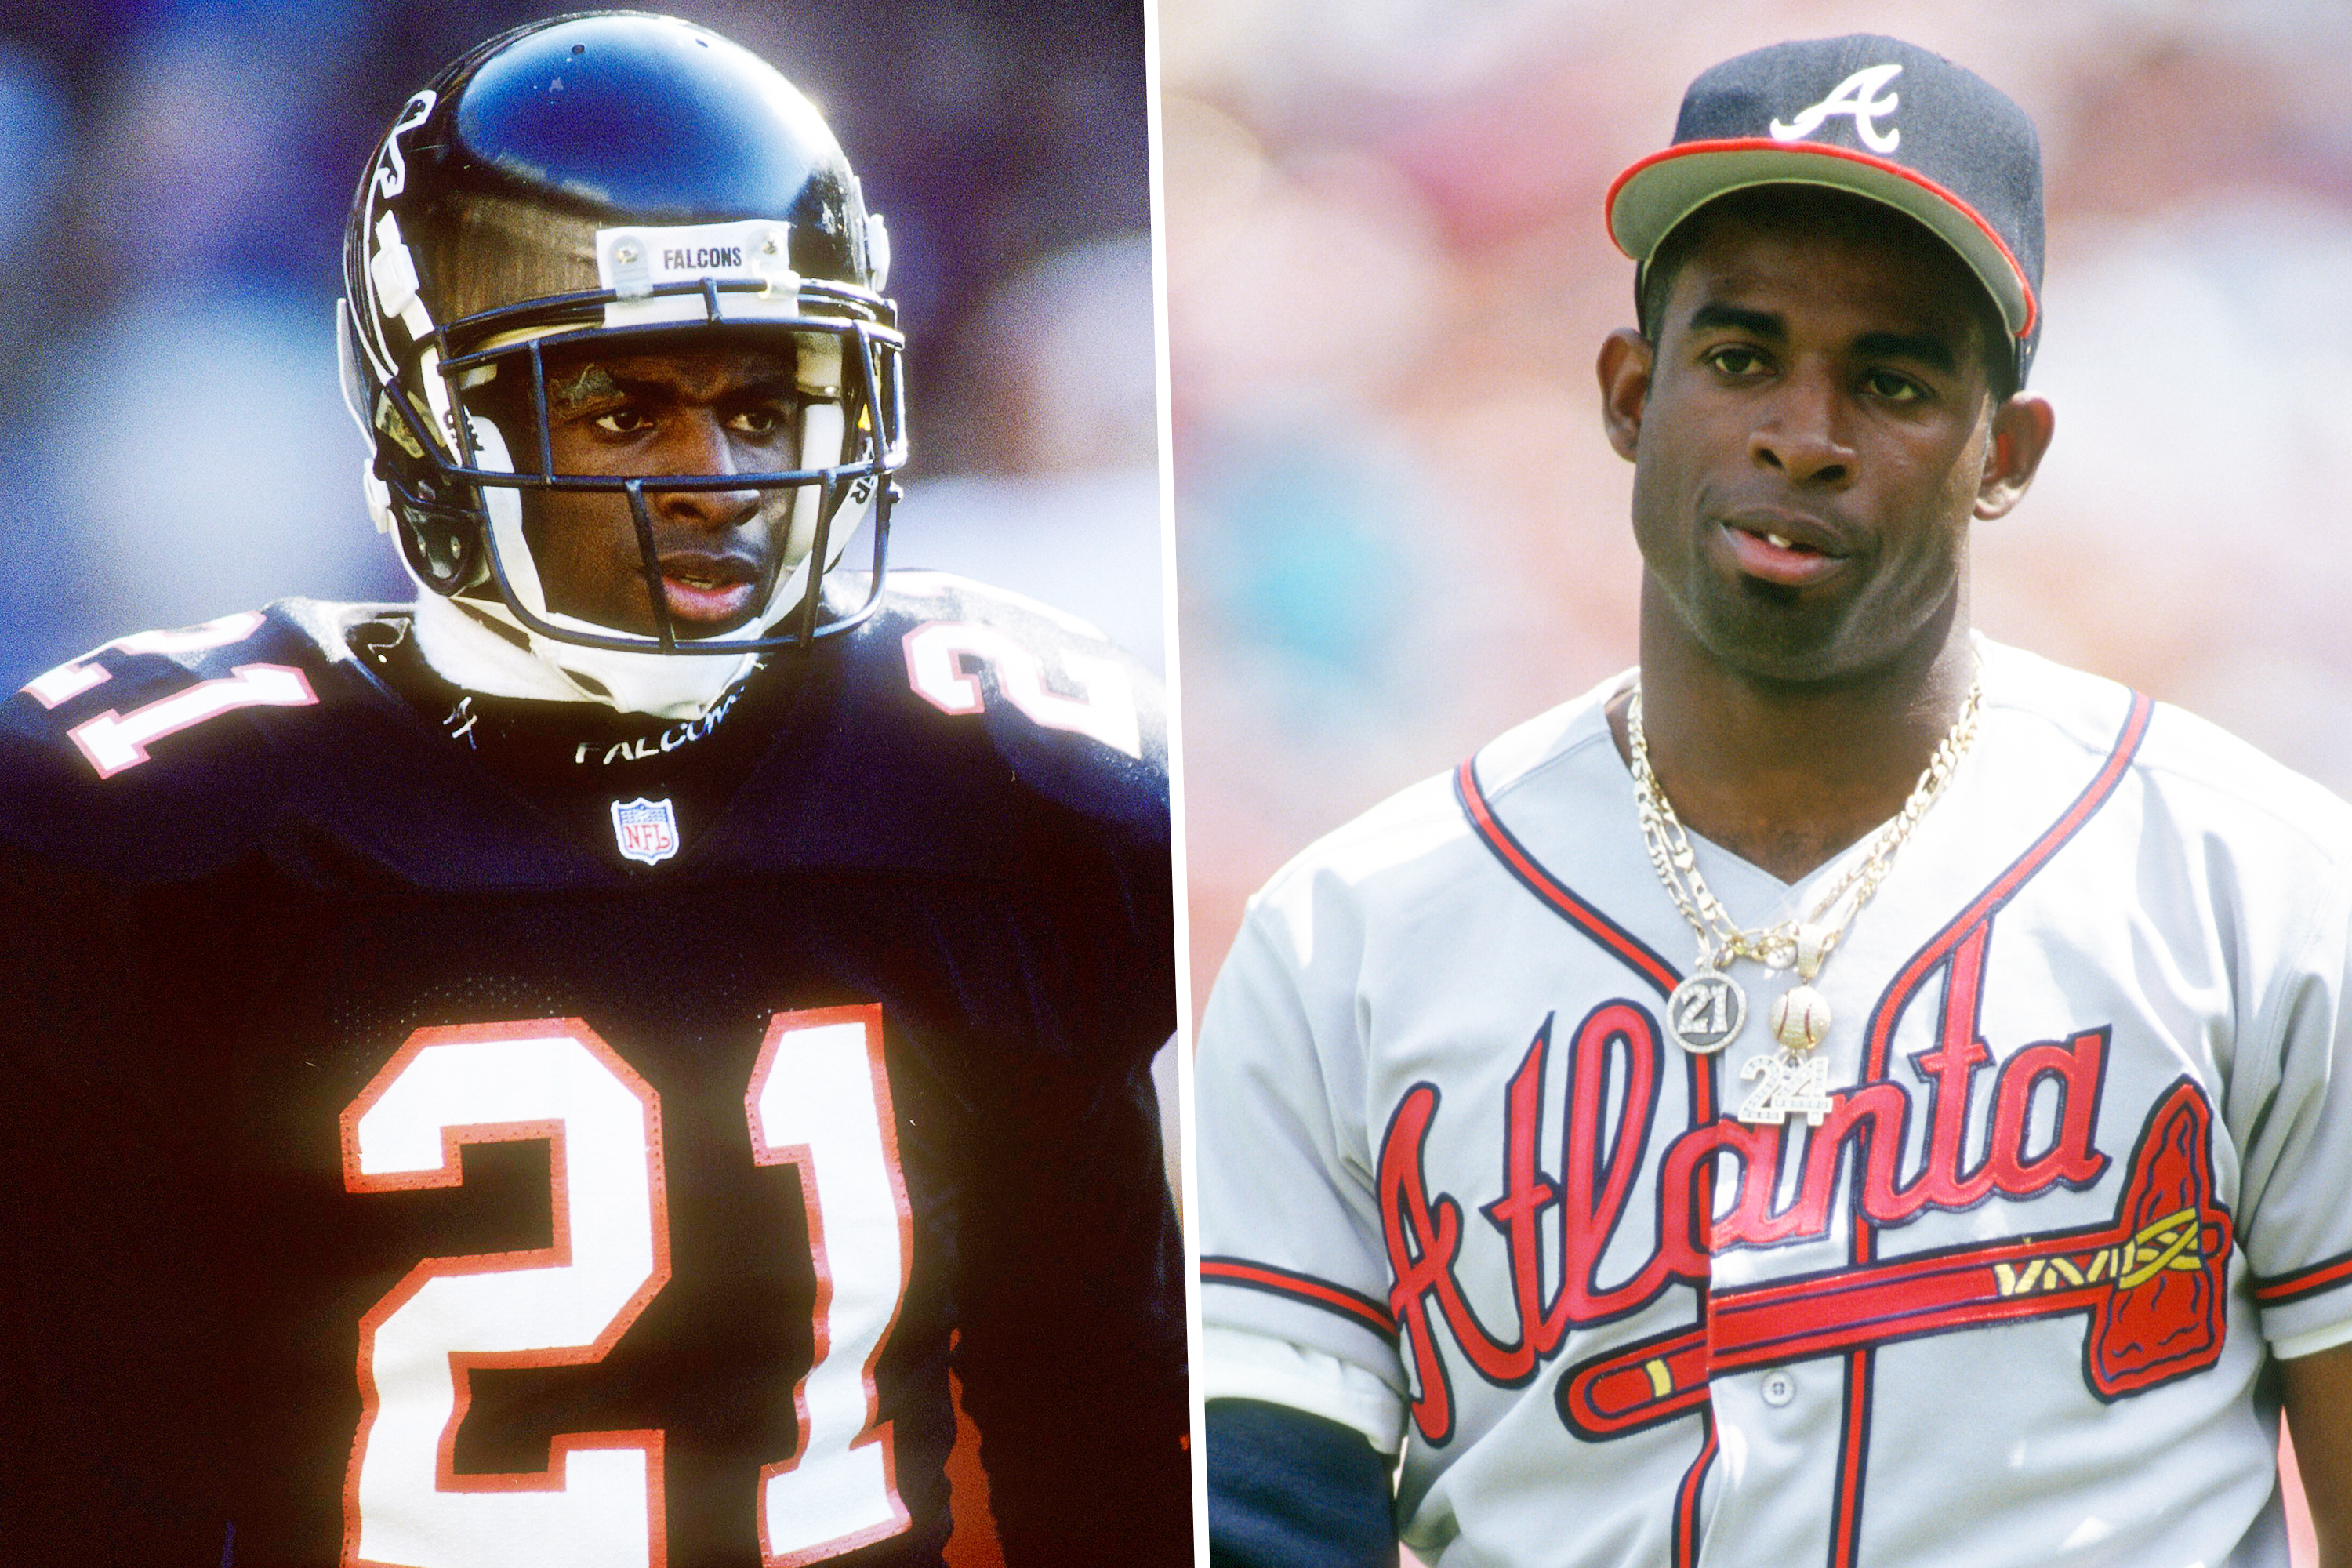 Heritage Uniforms and Jerseys and Stadiums - NFL, MLB, NHL, NBA, NCAA, US  Colleges: Atlanta Braves Franchise History - Home Stadiums